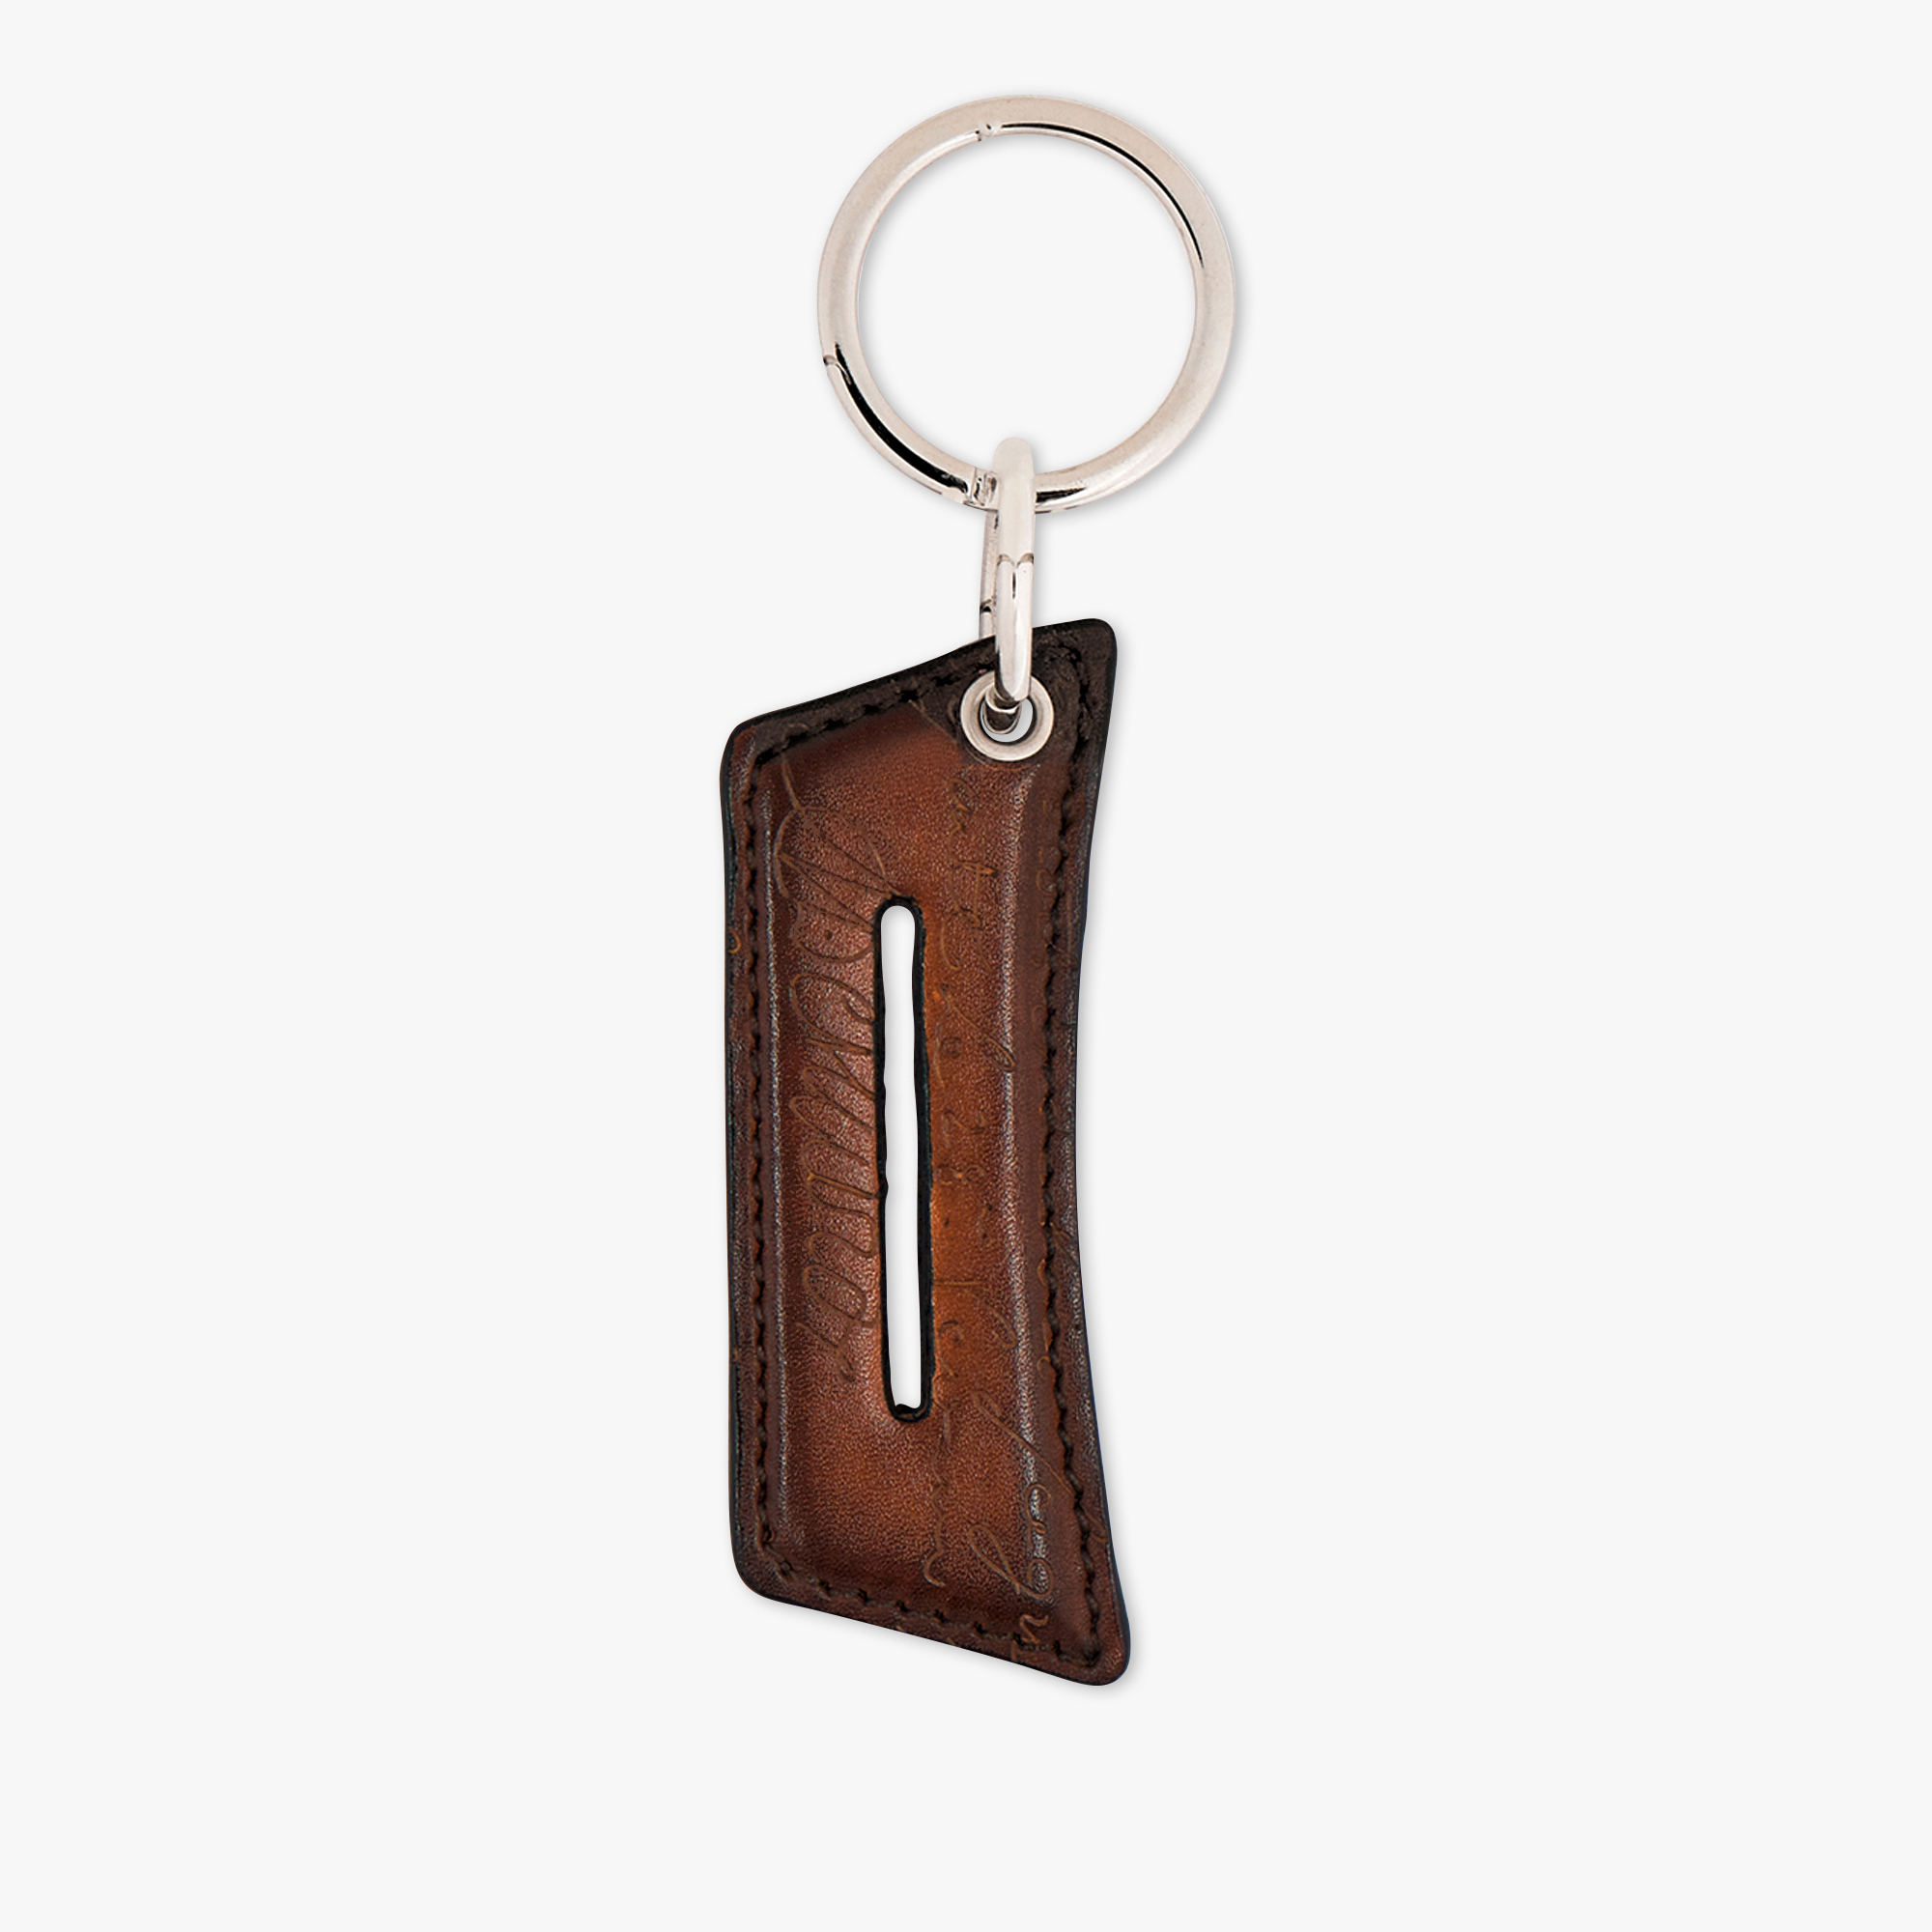 Andy Strap Scritto Leather Key Ring, CACAO INTENSO, hi-res